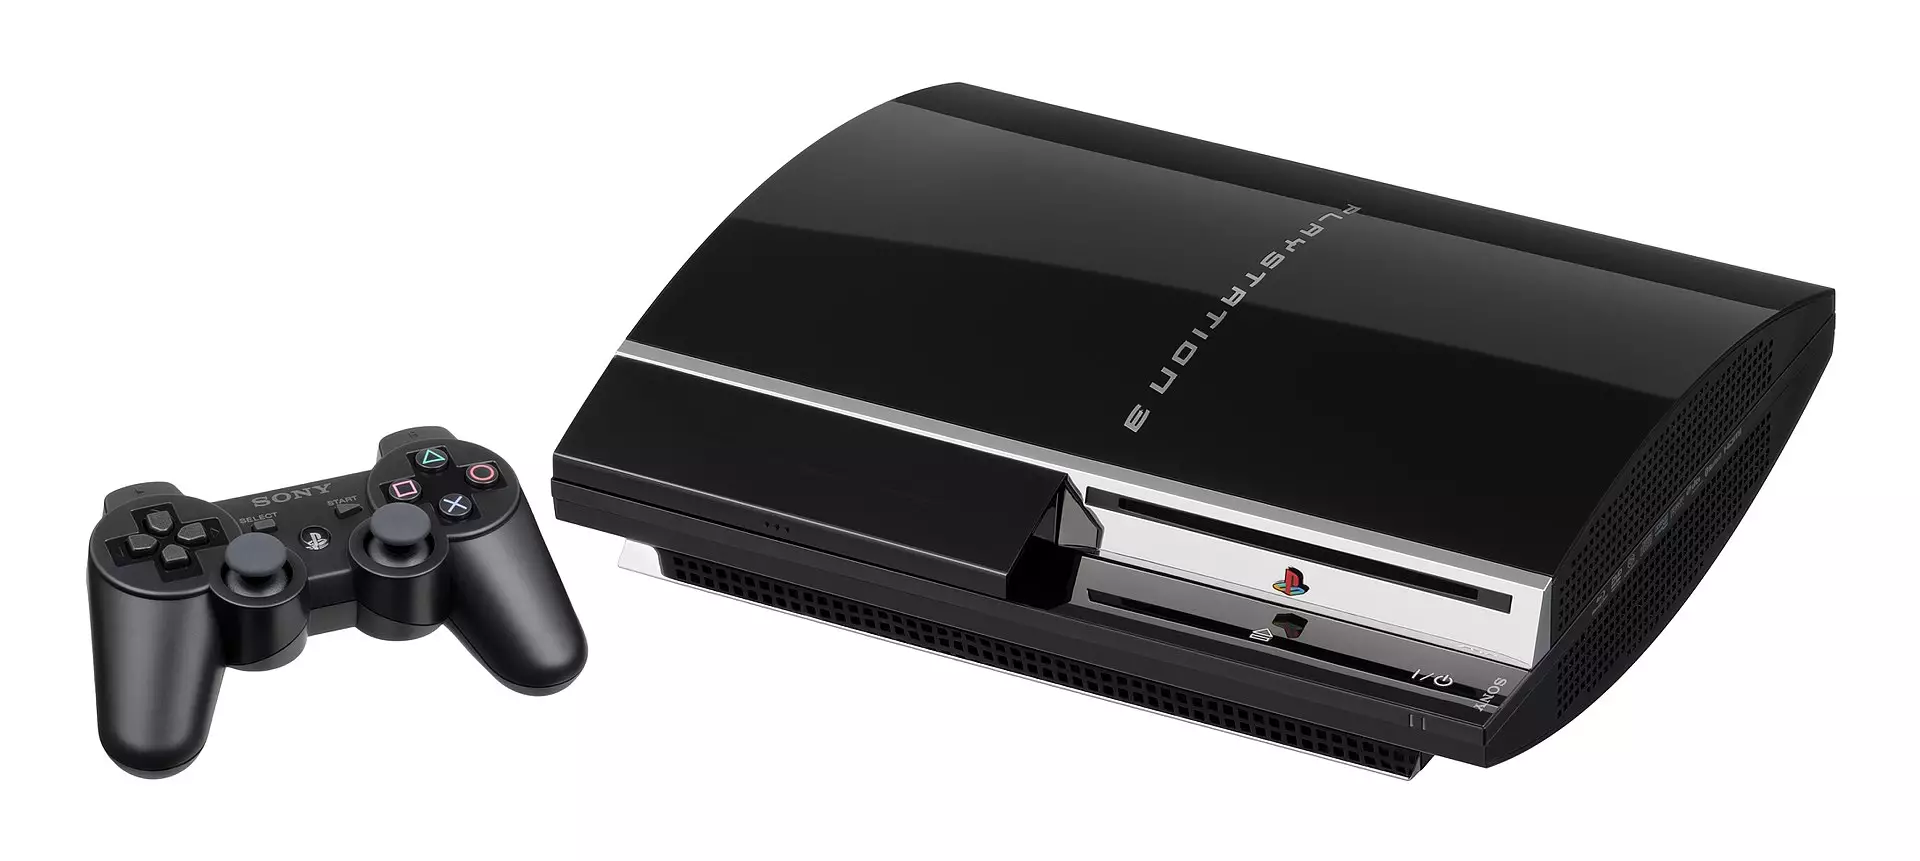 The original PlayStation 3 was backwards-compatible with PS1 and PS2 games /